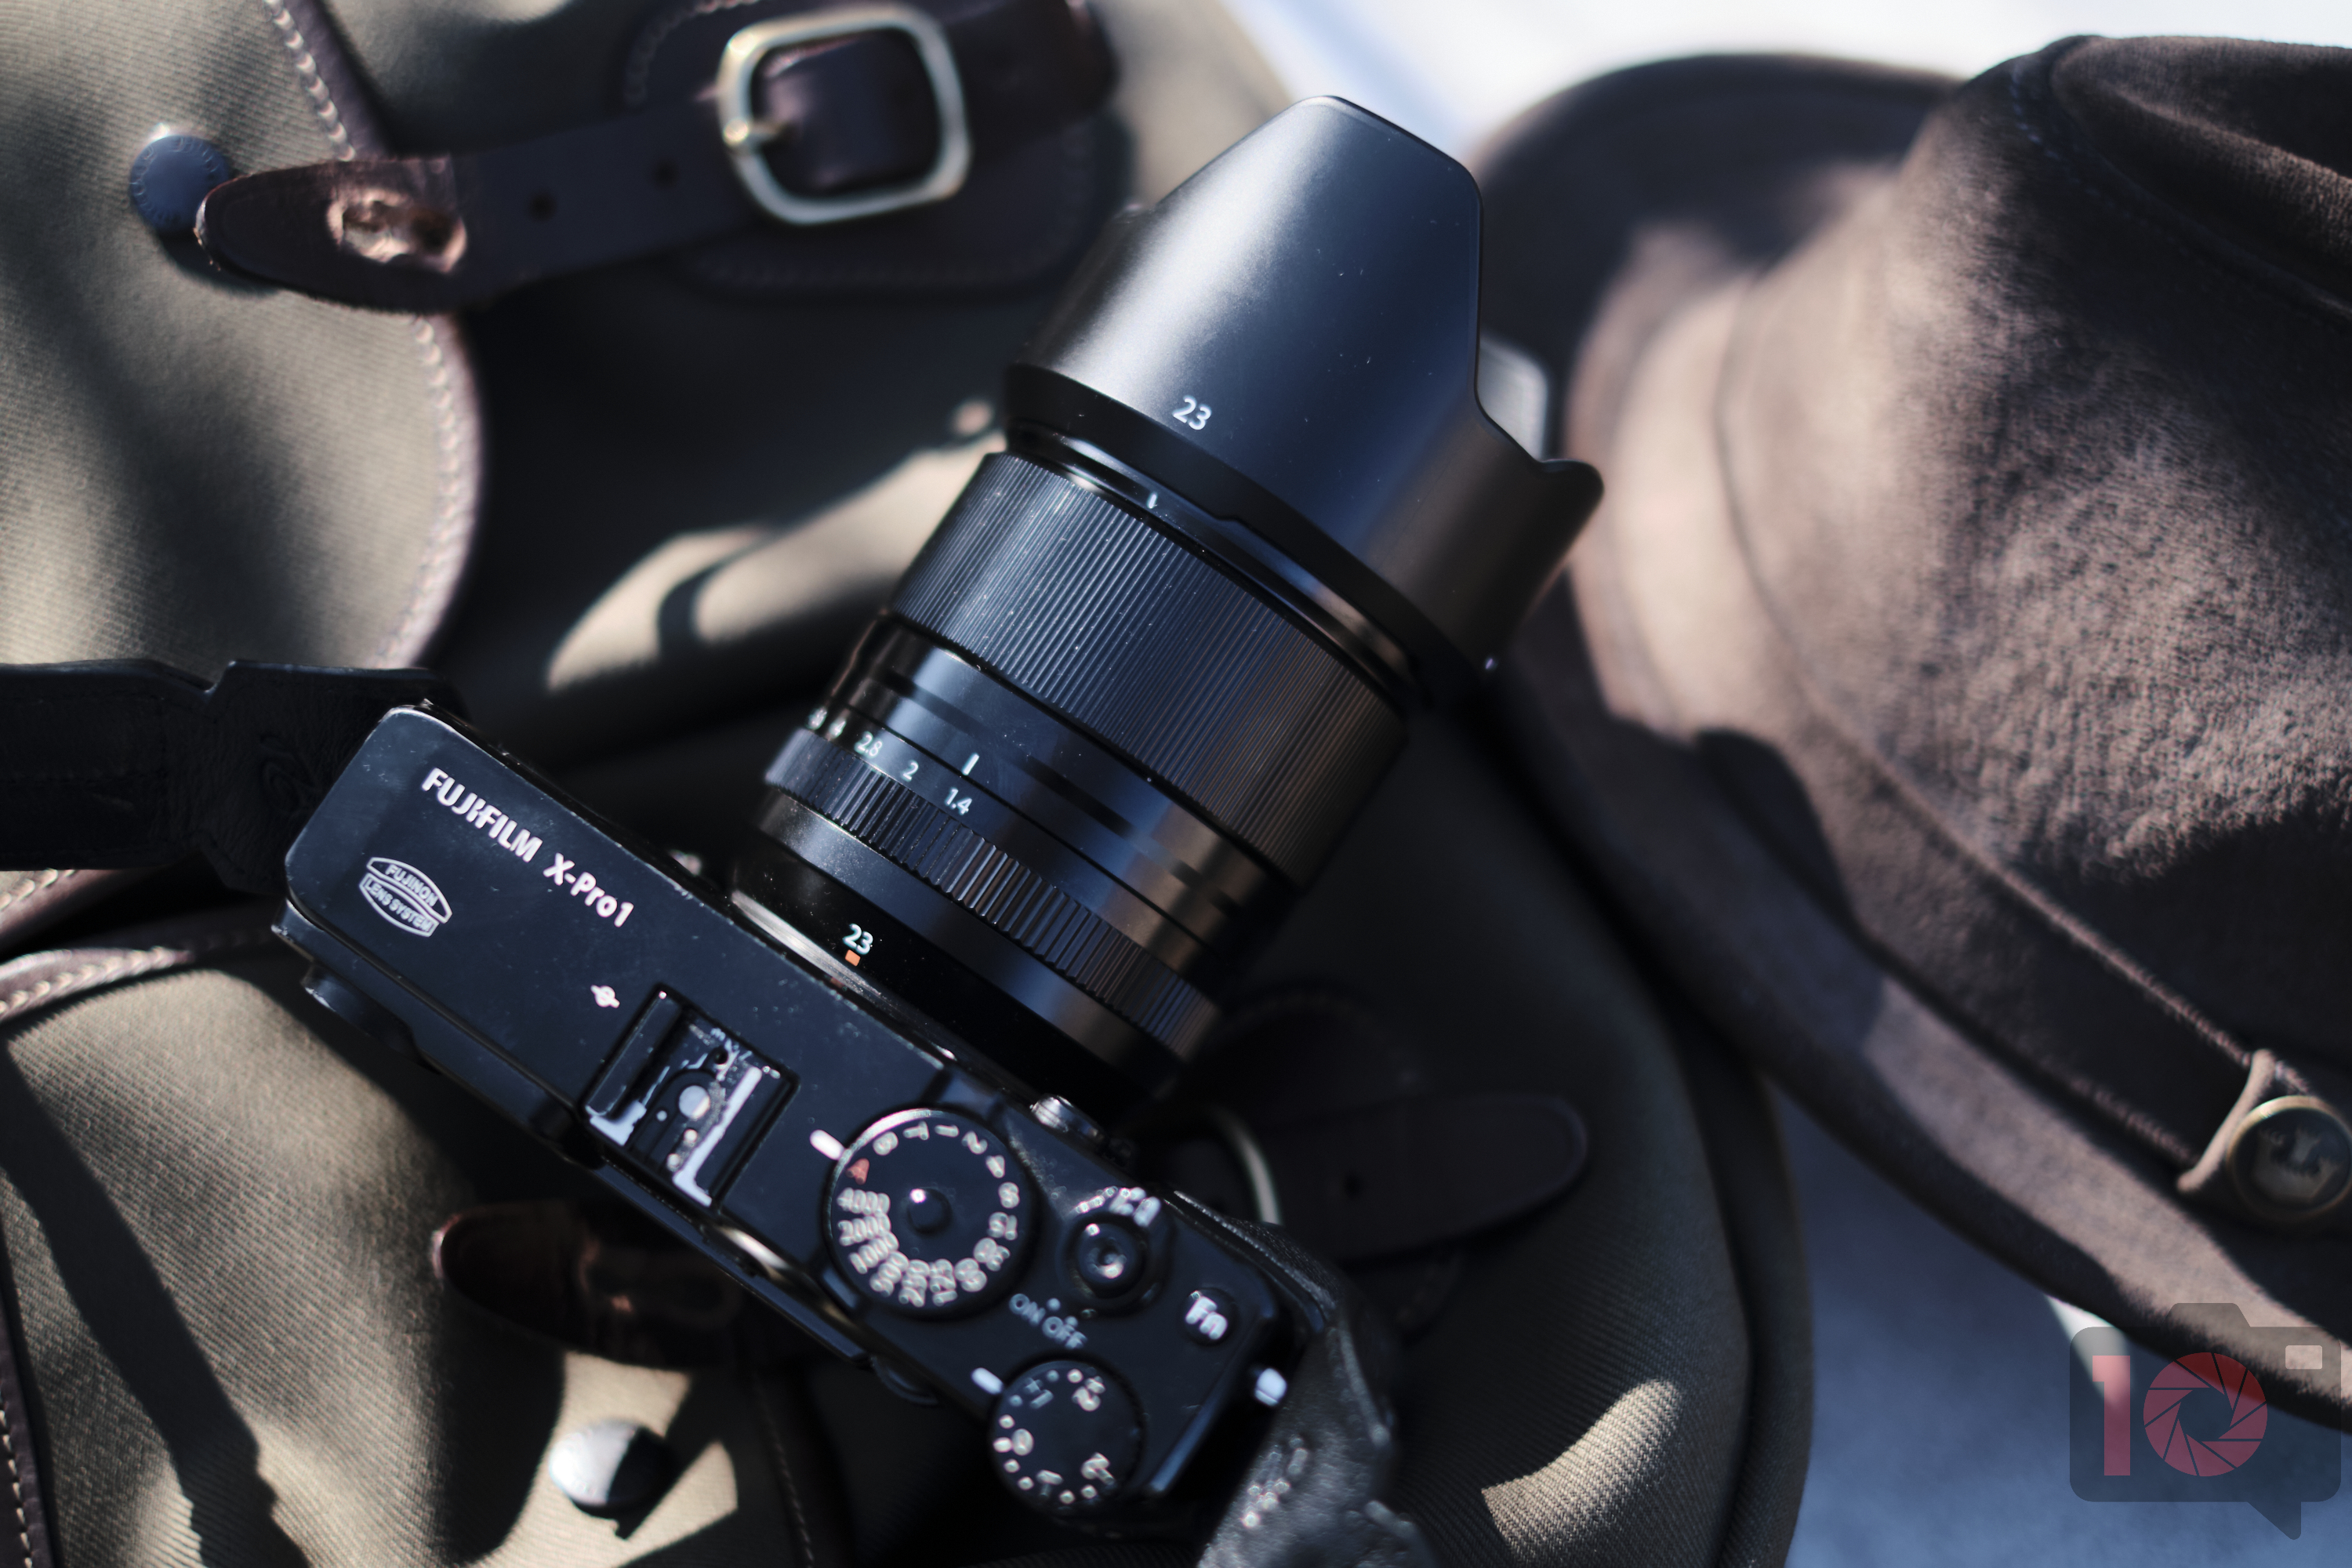 Chris Gampat The Phoblographer Fujifilm 23mm f1.4 R WR LM review product images 1.41-1600s400 1